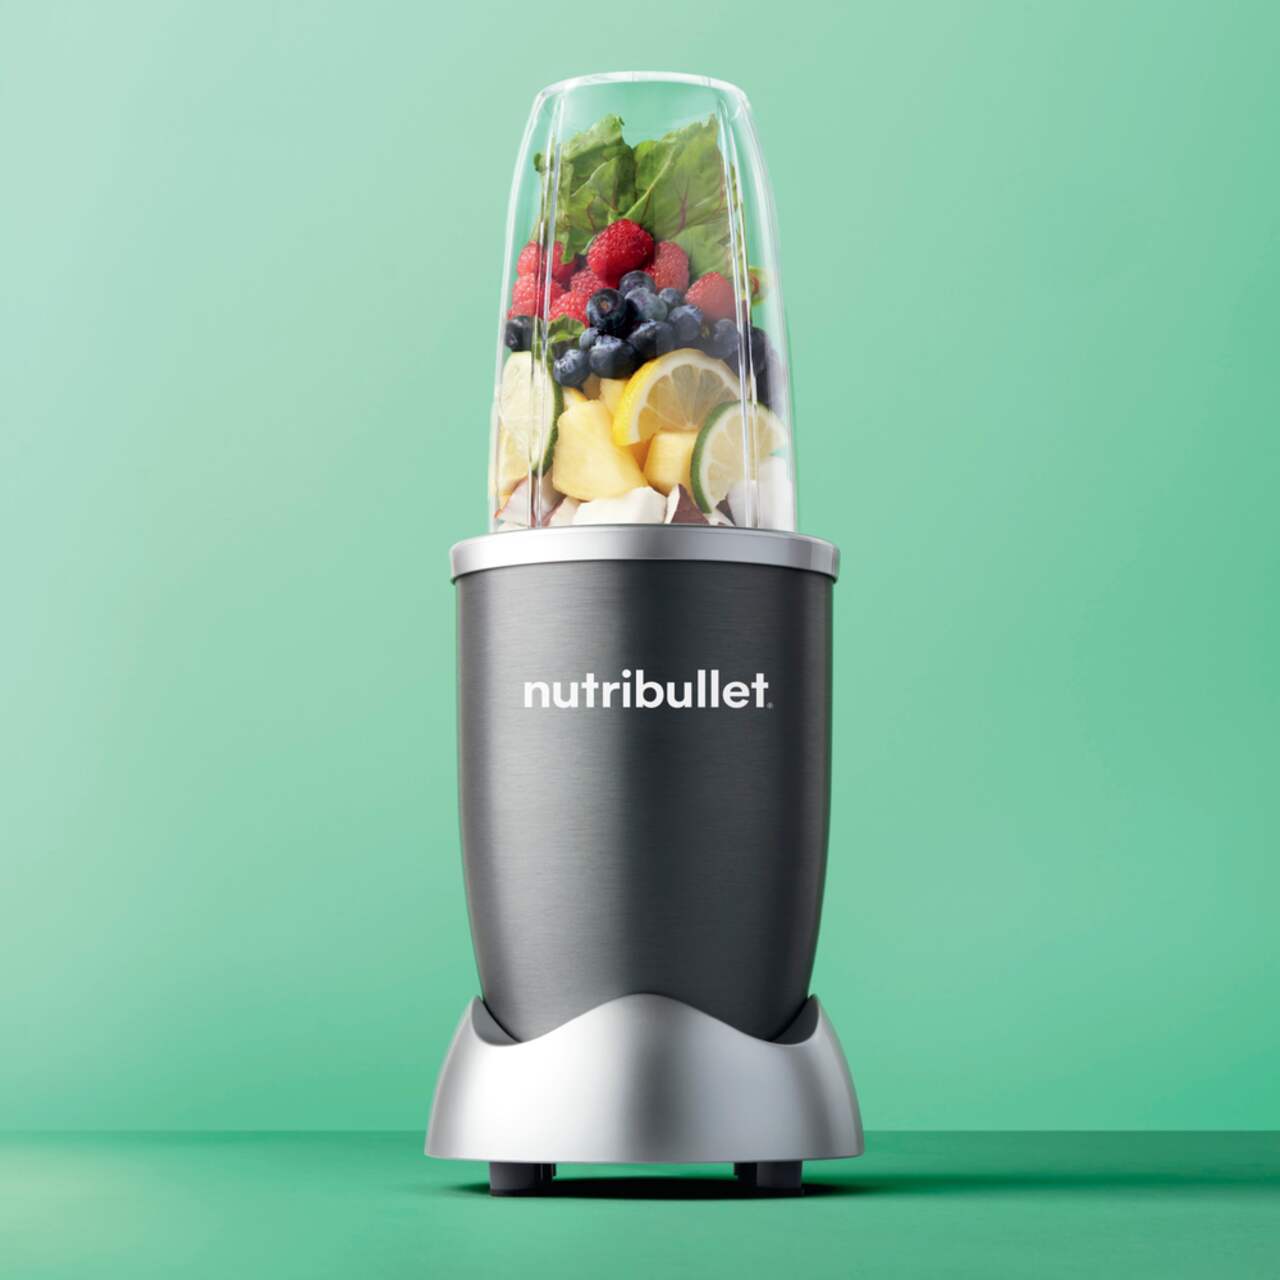 https://media-www.canadiantire.ca/product/living/kitchen/kitchen-appliances/0430674/nutri-bullet-nutrition-extractor-789ebb6d-5f9e-4e12-930a-e0612bf8b442.png?imdensity=1&imwidth=1244&impolicy=mZoom